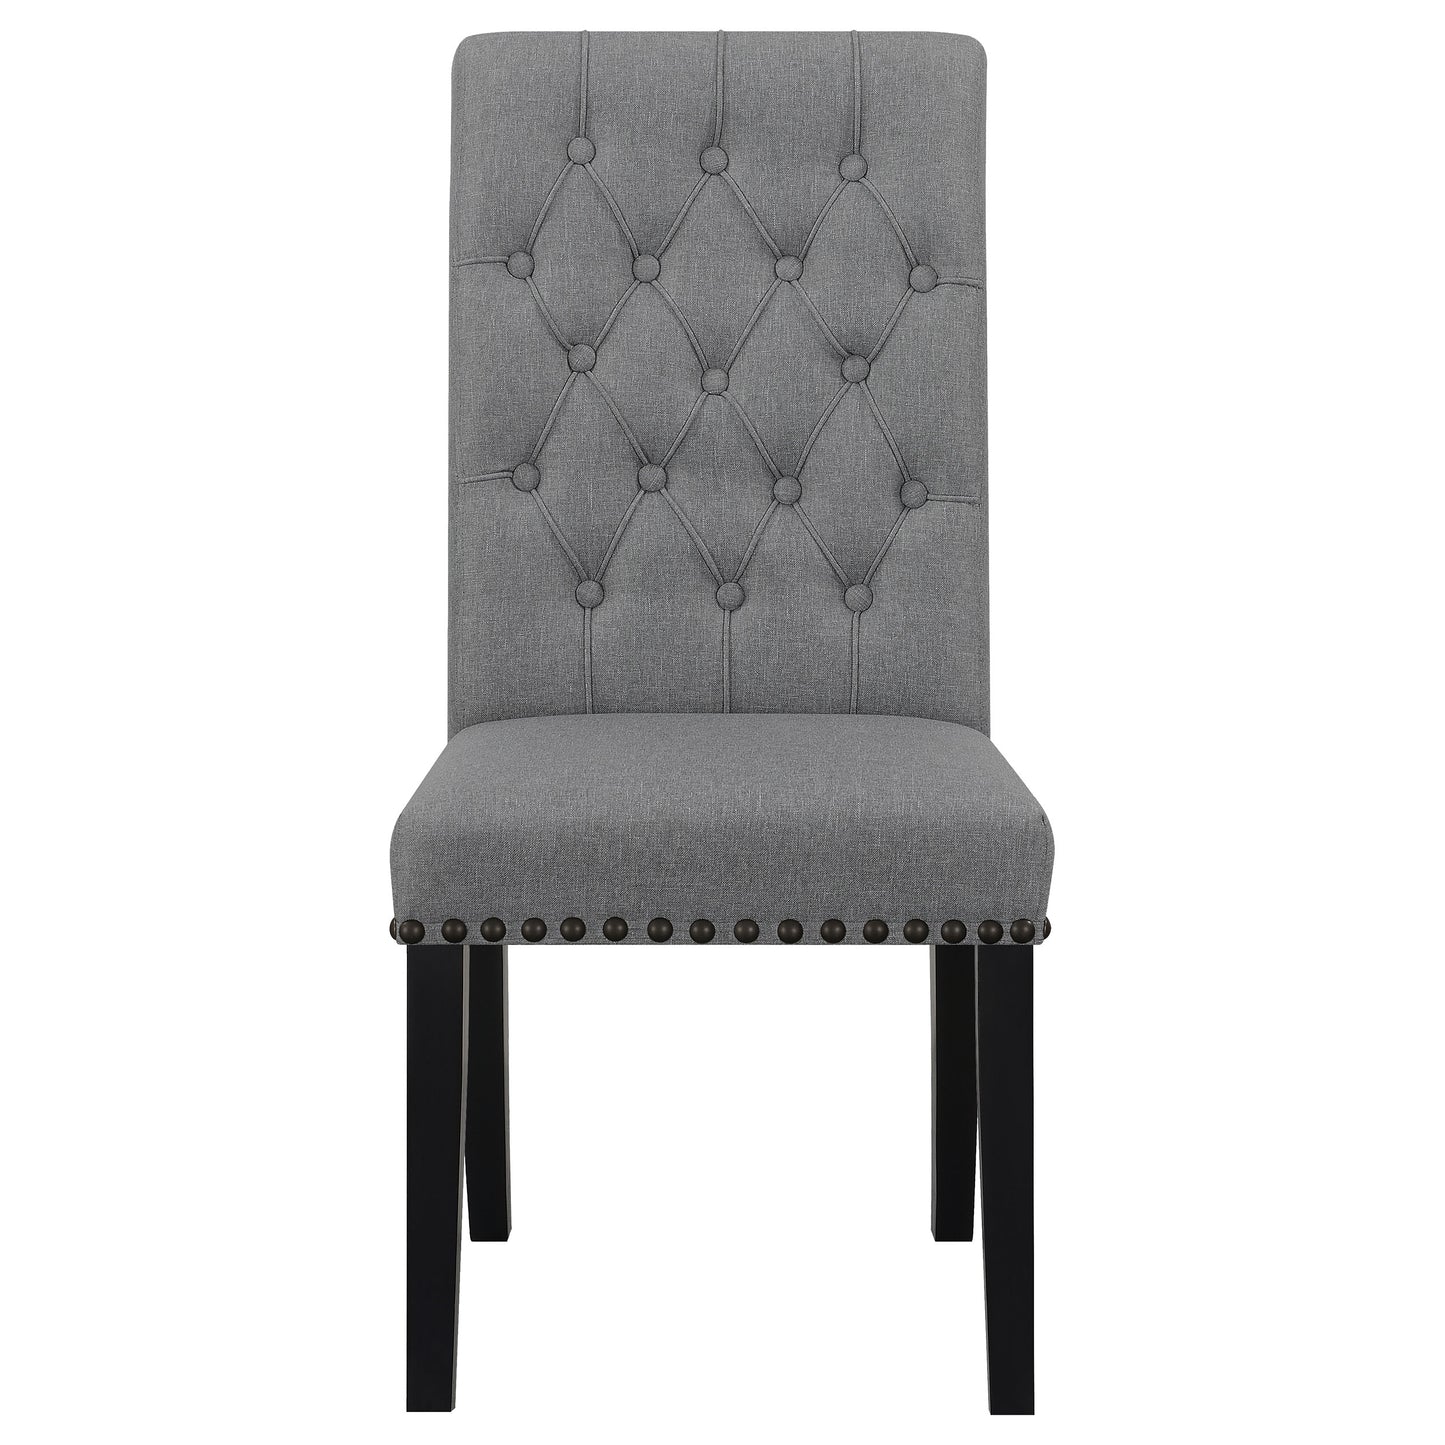 Alana Upholstered Tufted Side Chairs with Nailhead Trim (Set of 2)